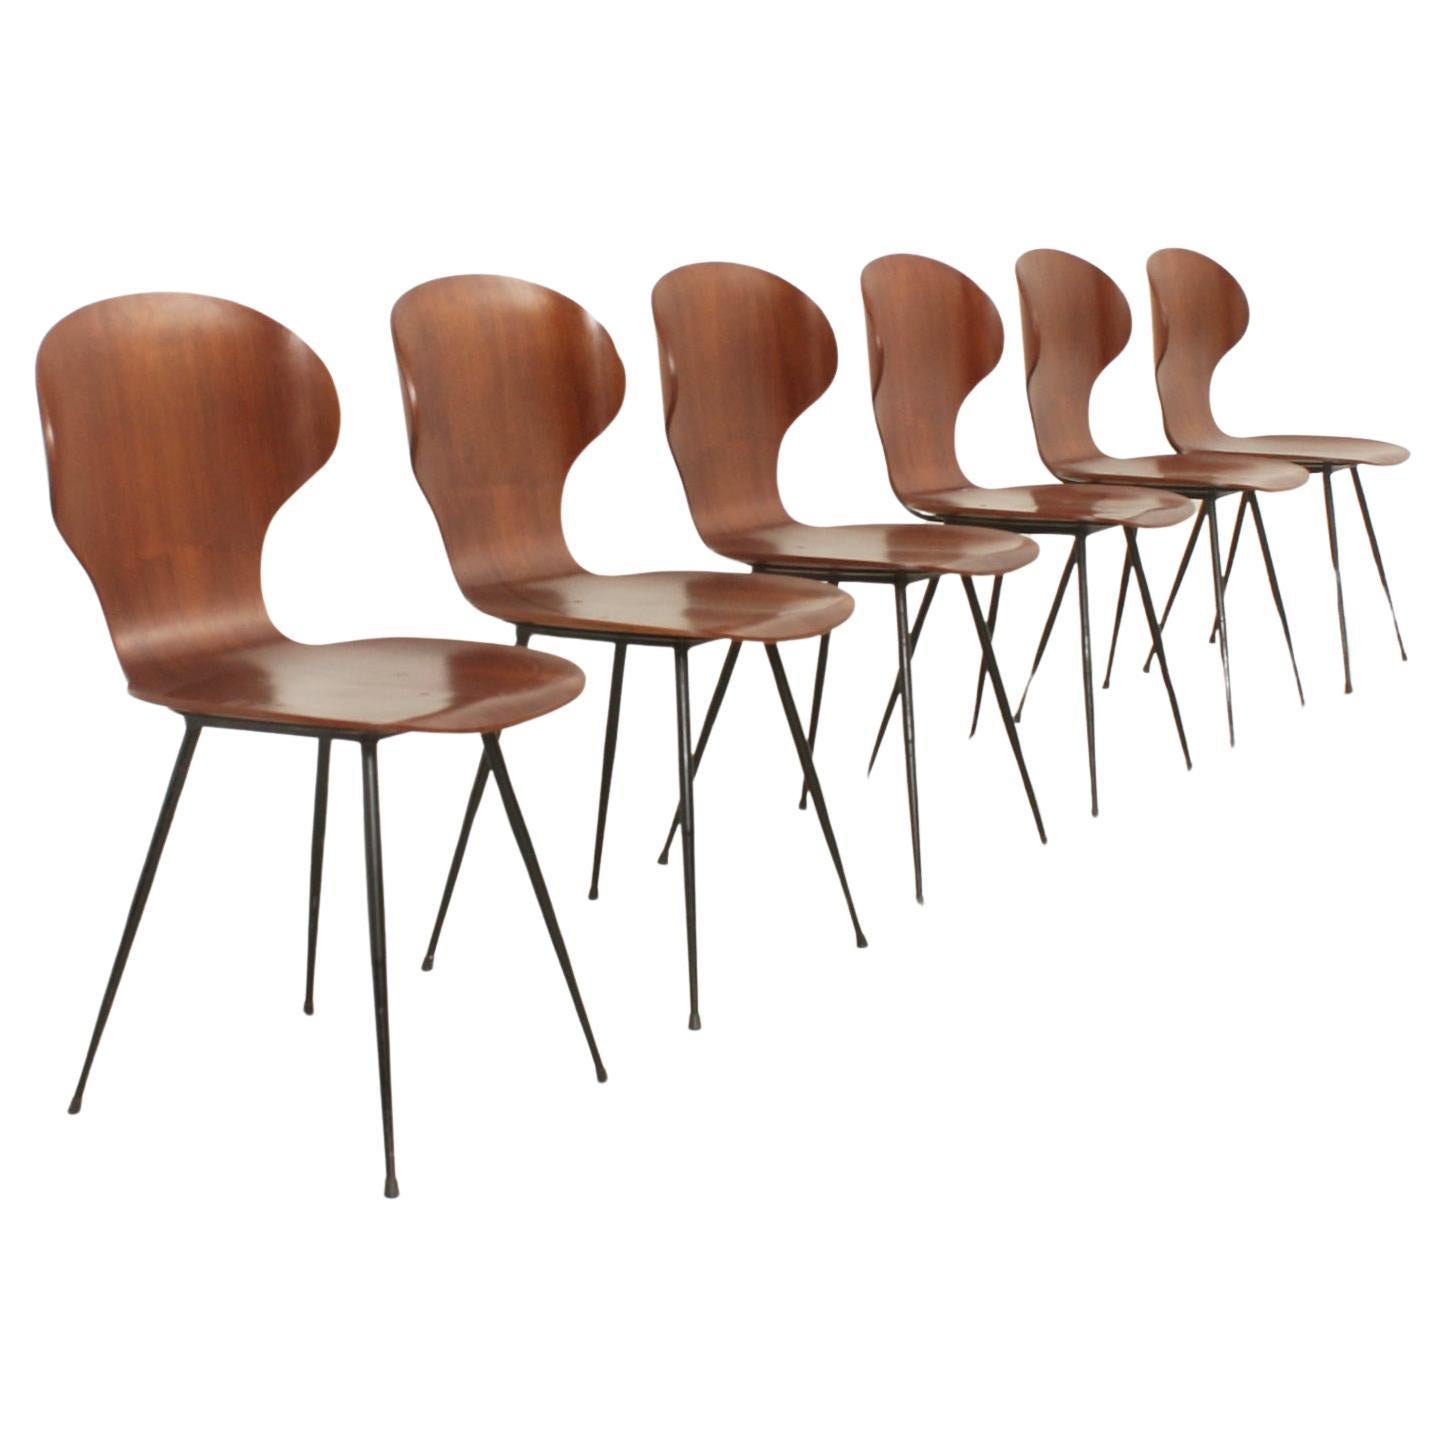 Set of Six Plywood Side Chairs by Carlo Ratti, Italy, 1950's For Sale